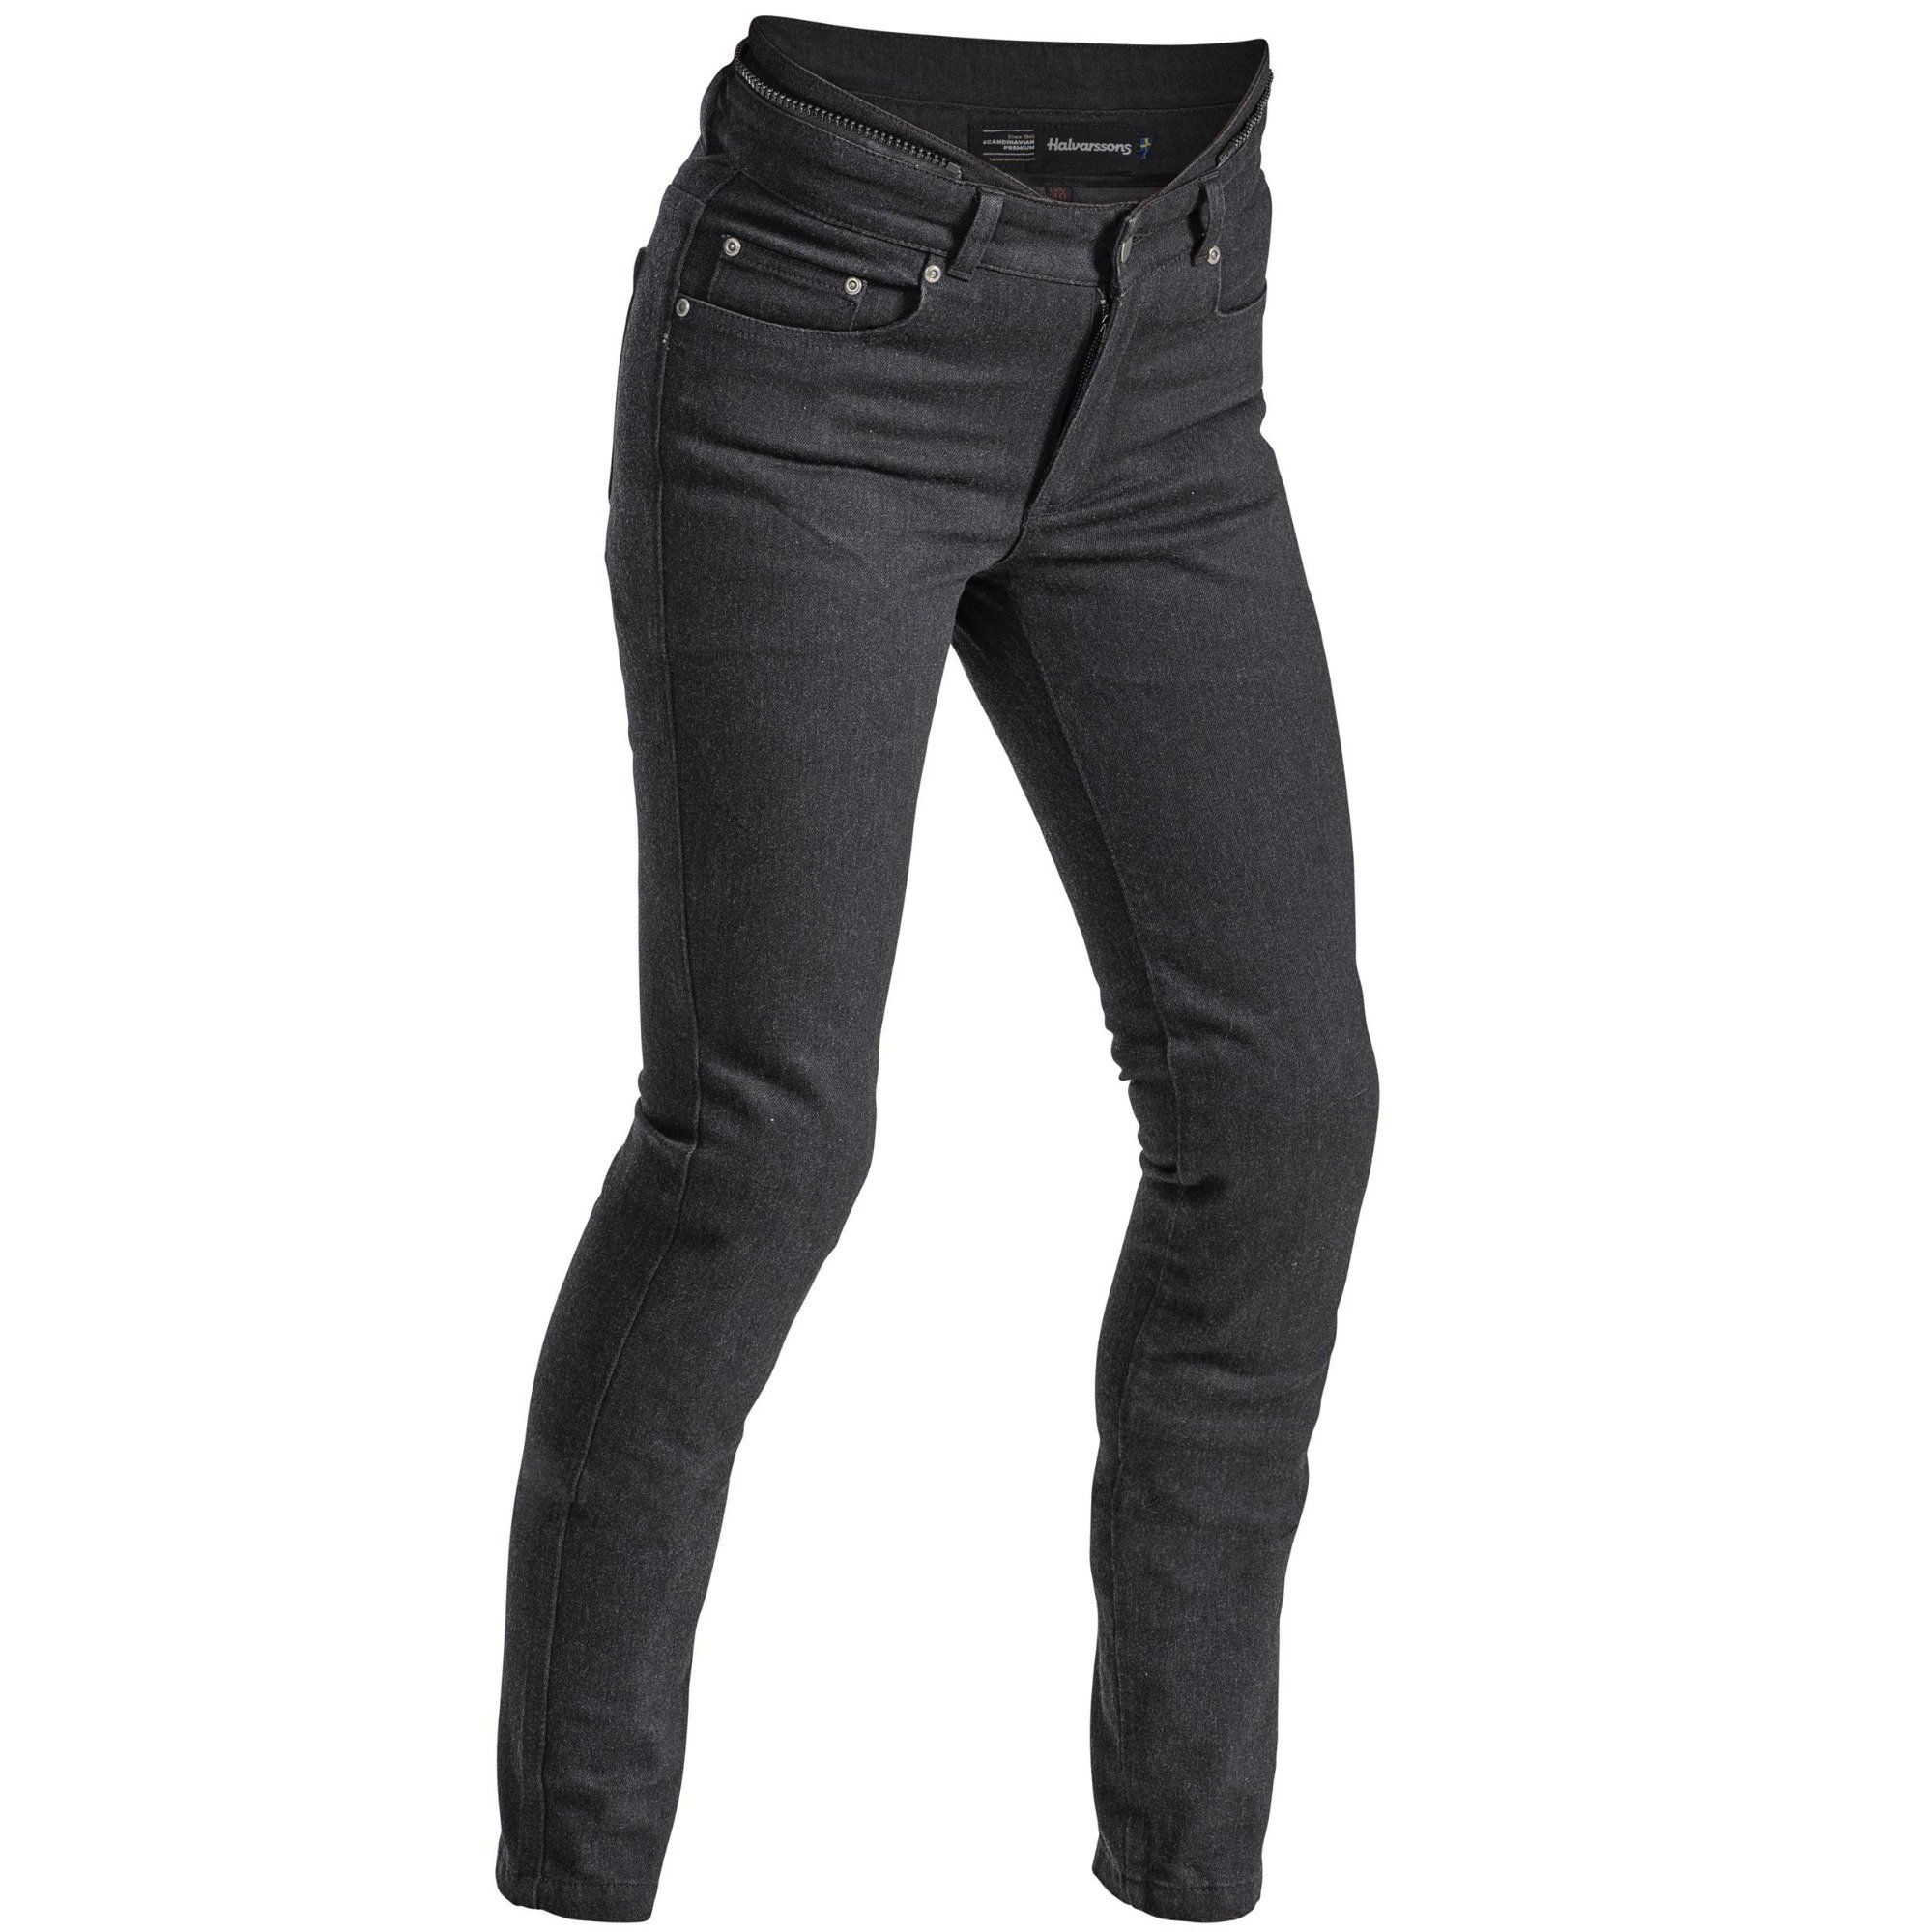 Image of Halvarssons Jeans Nyberg Woman Black Size 34 ID 6438235239270